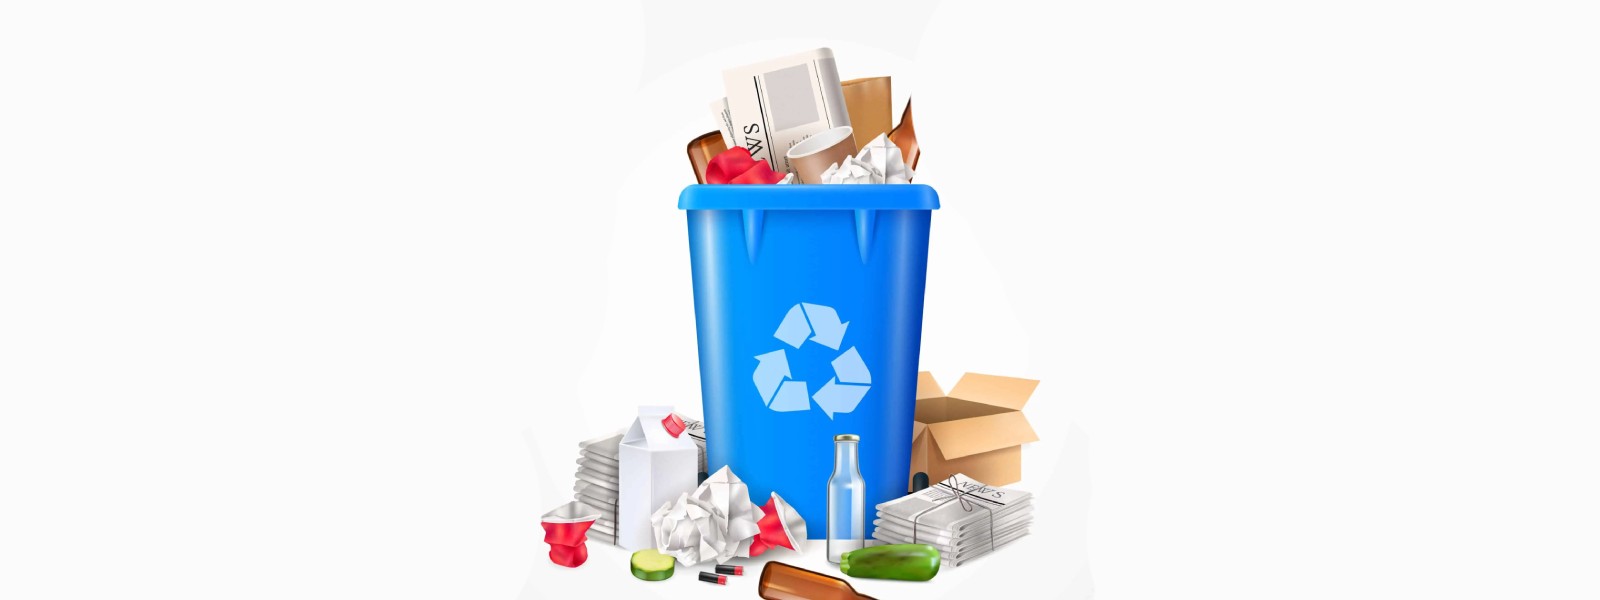 How to deal with Biomedical Waste as a homeowner